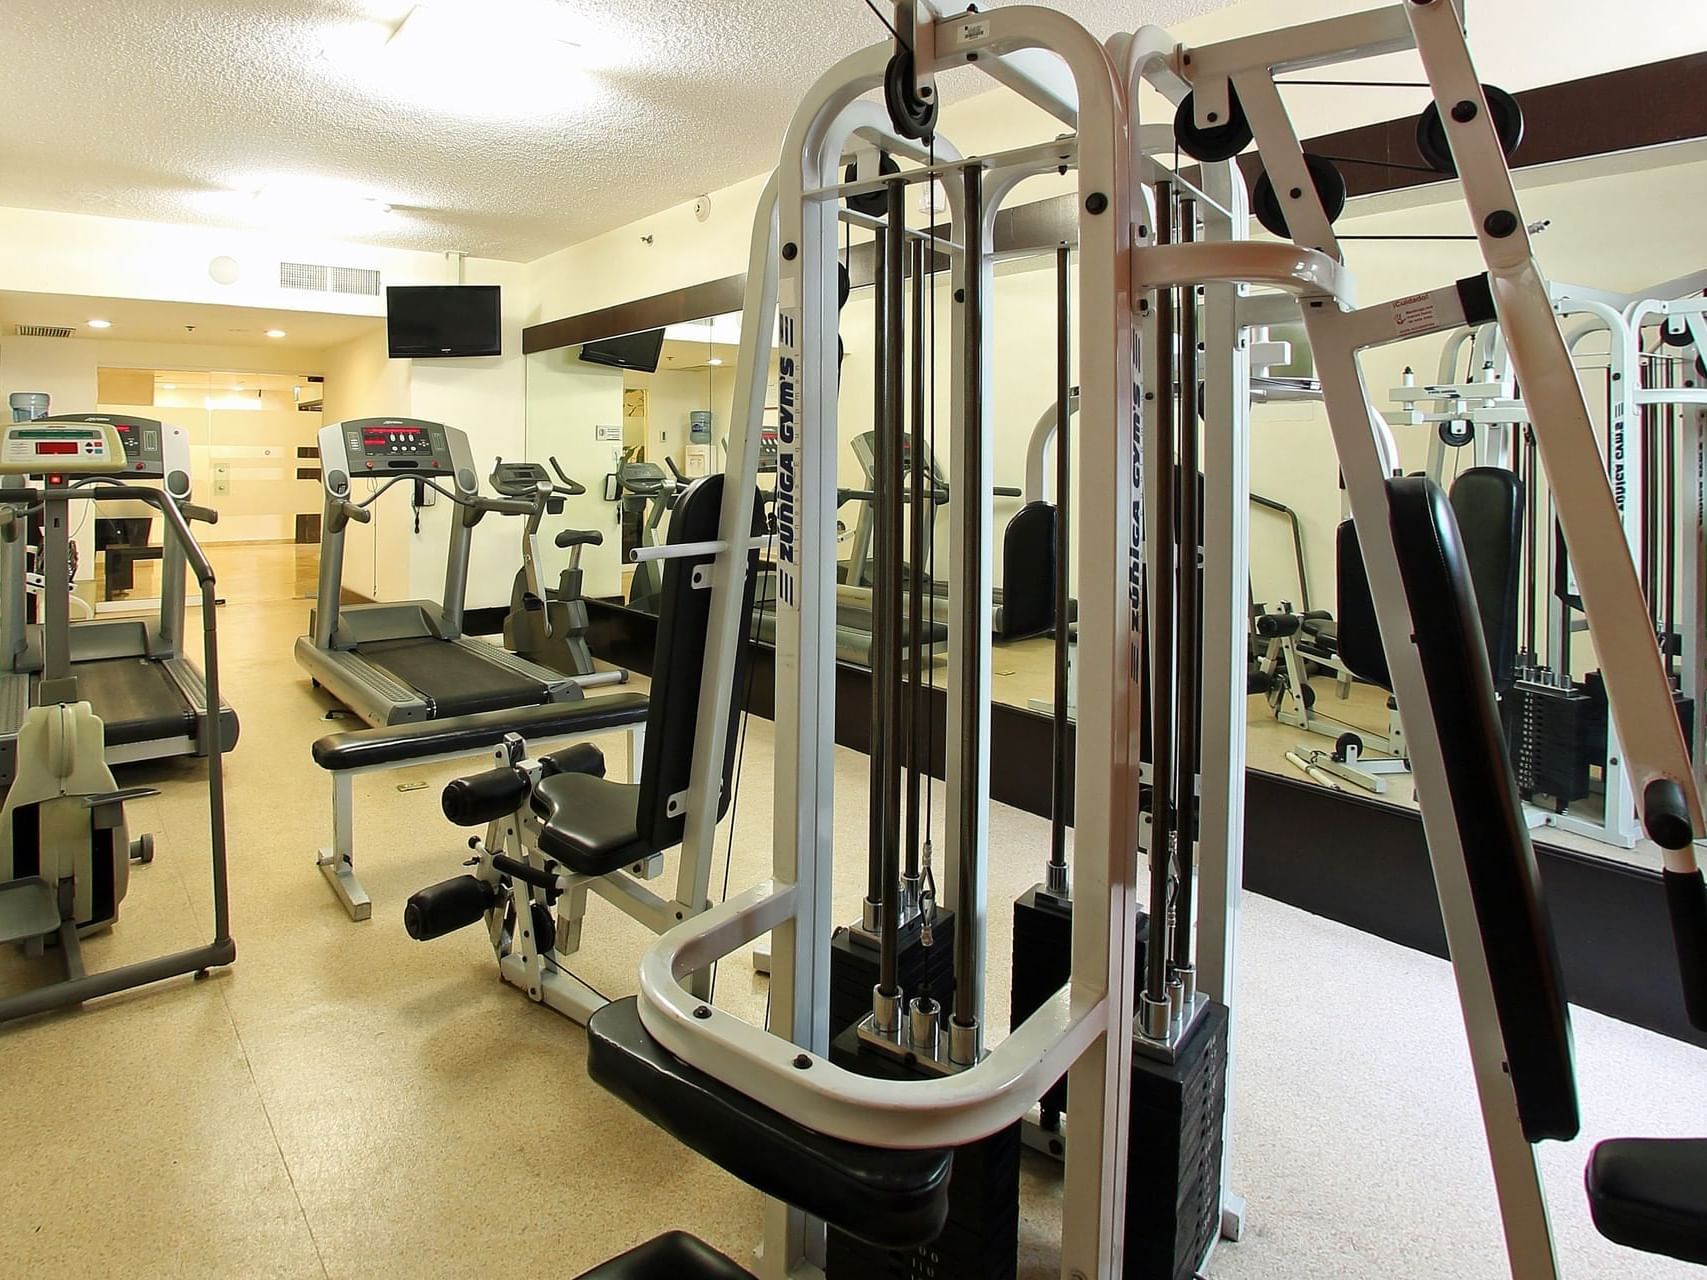 Exercise machines in a Gym Wellness Center at Fiesta Inn Hotels